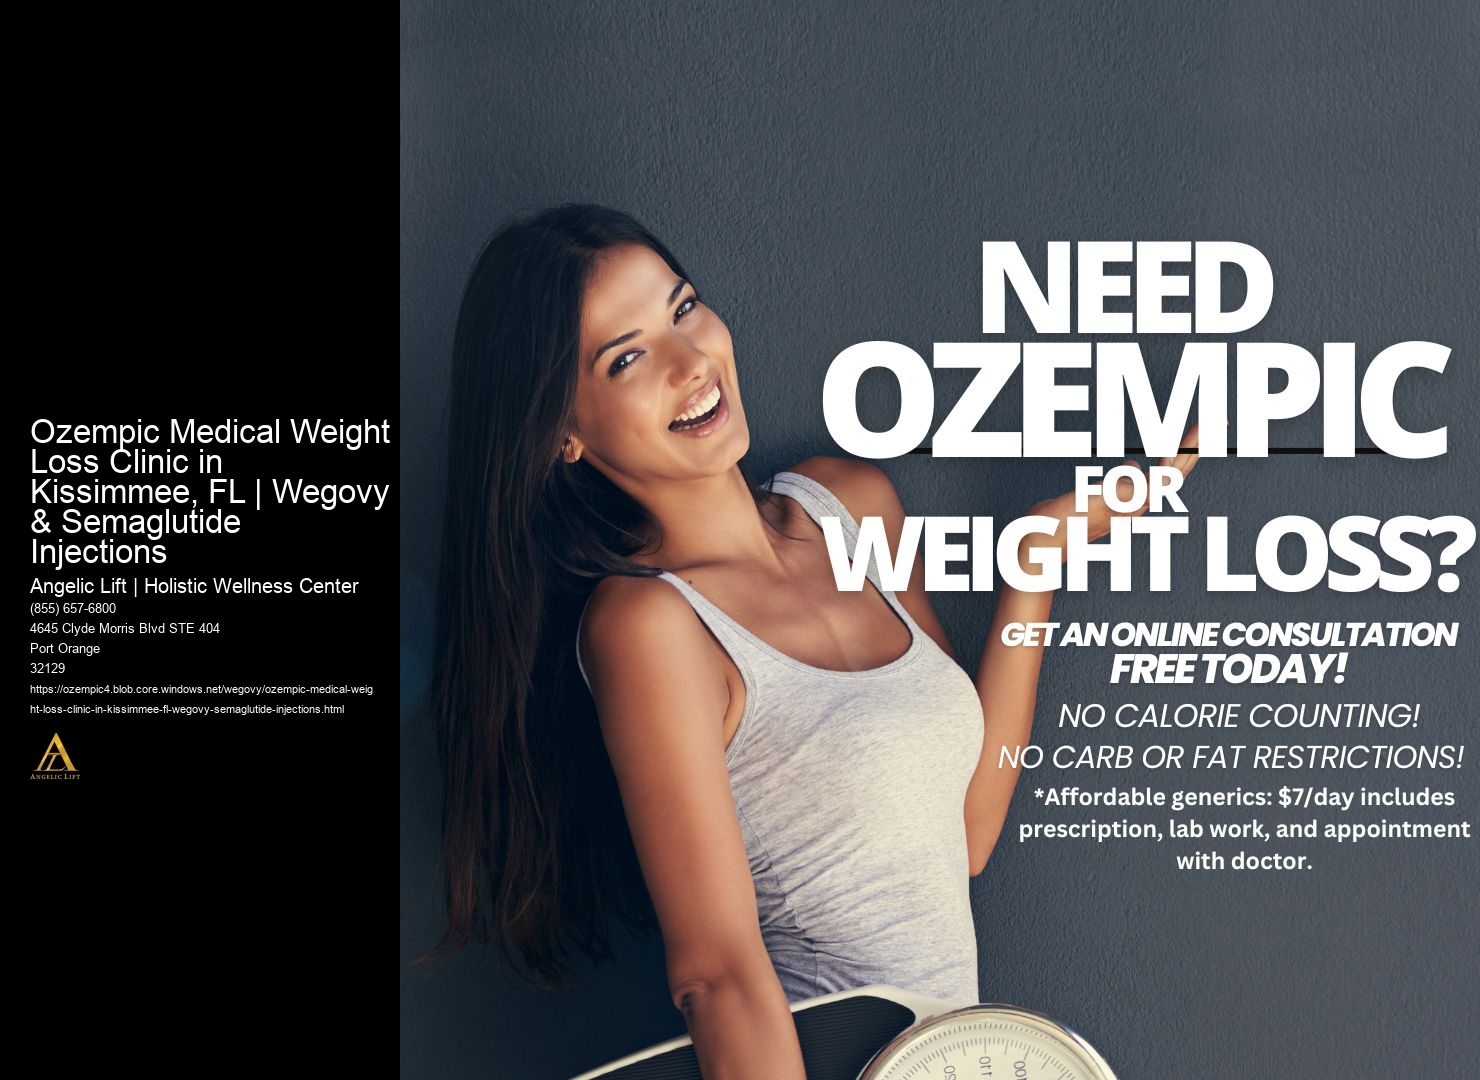 Ozempic Medical Weight Loss Clinic in Kissimmee, FL | Wegovy & Semaglutide Injections